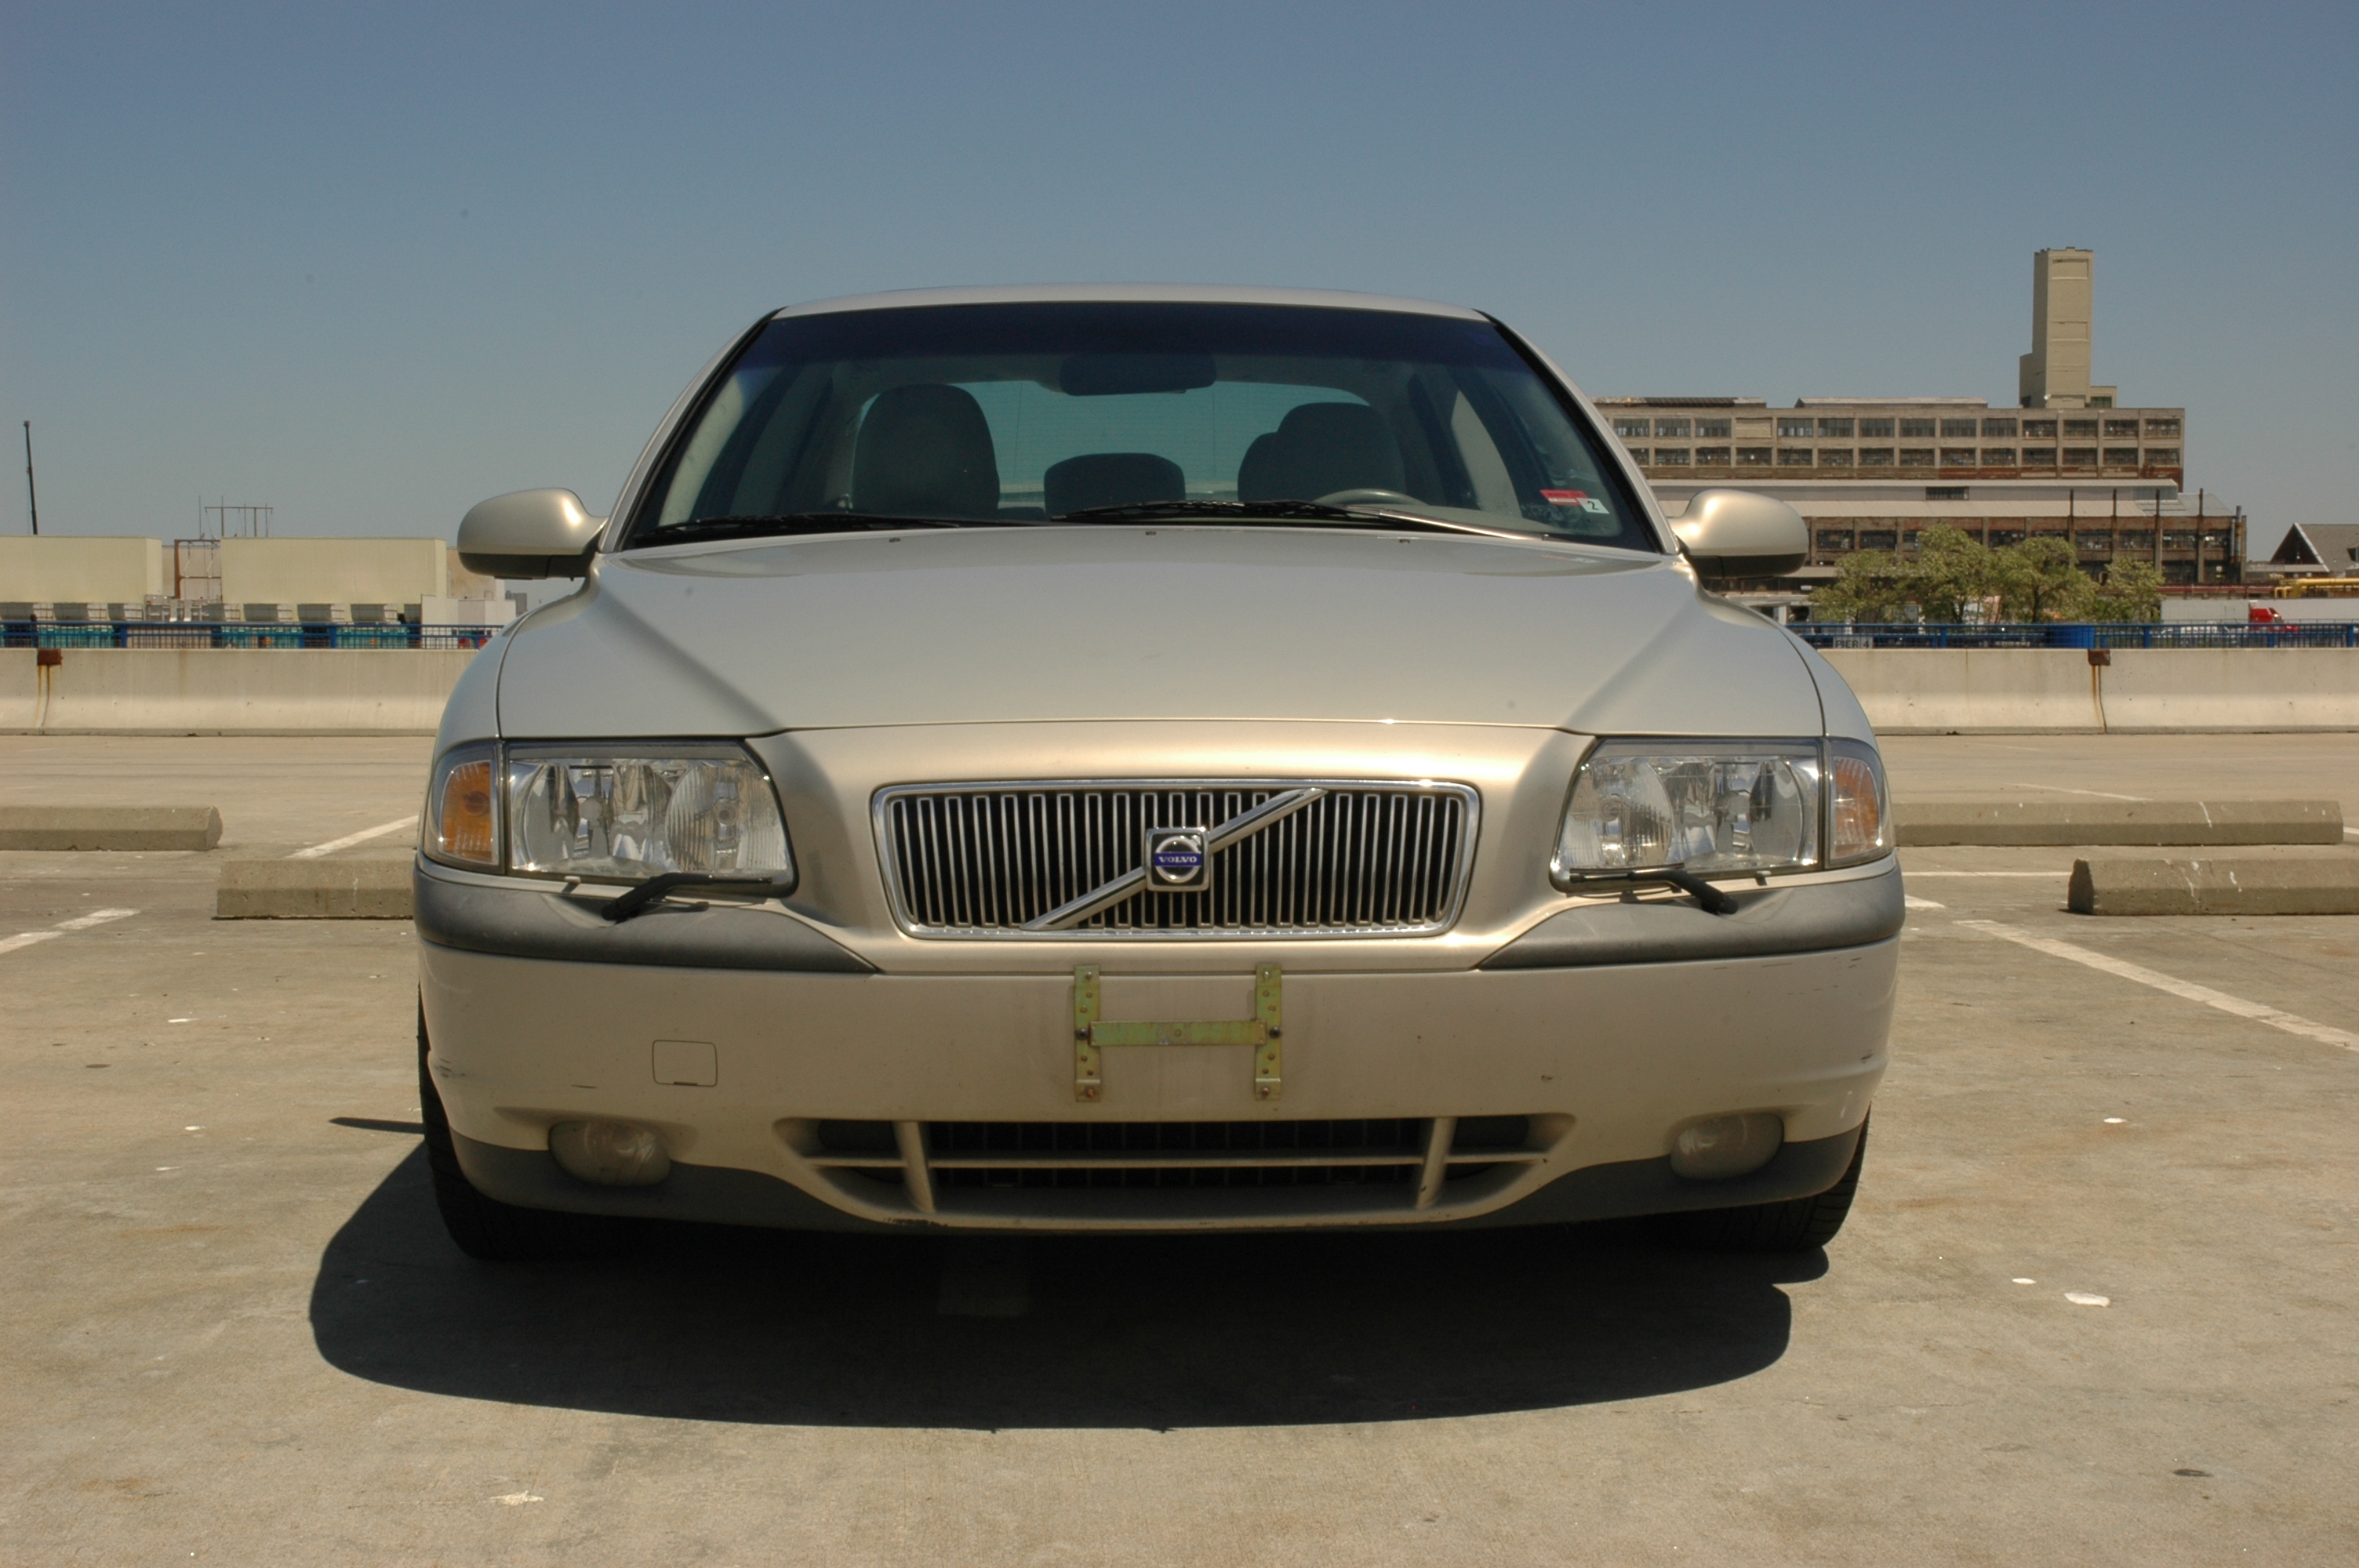 1999 Volvo S80 T6 - For Sale | Flickr - Photo Sharing!